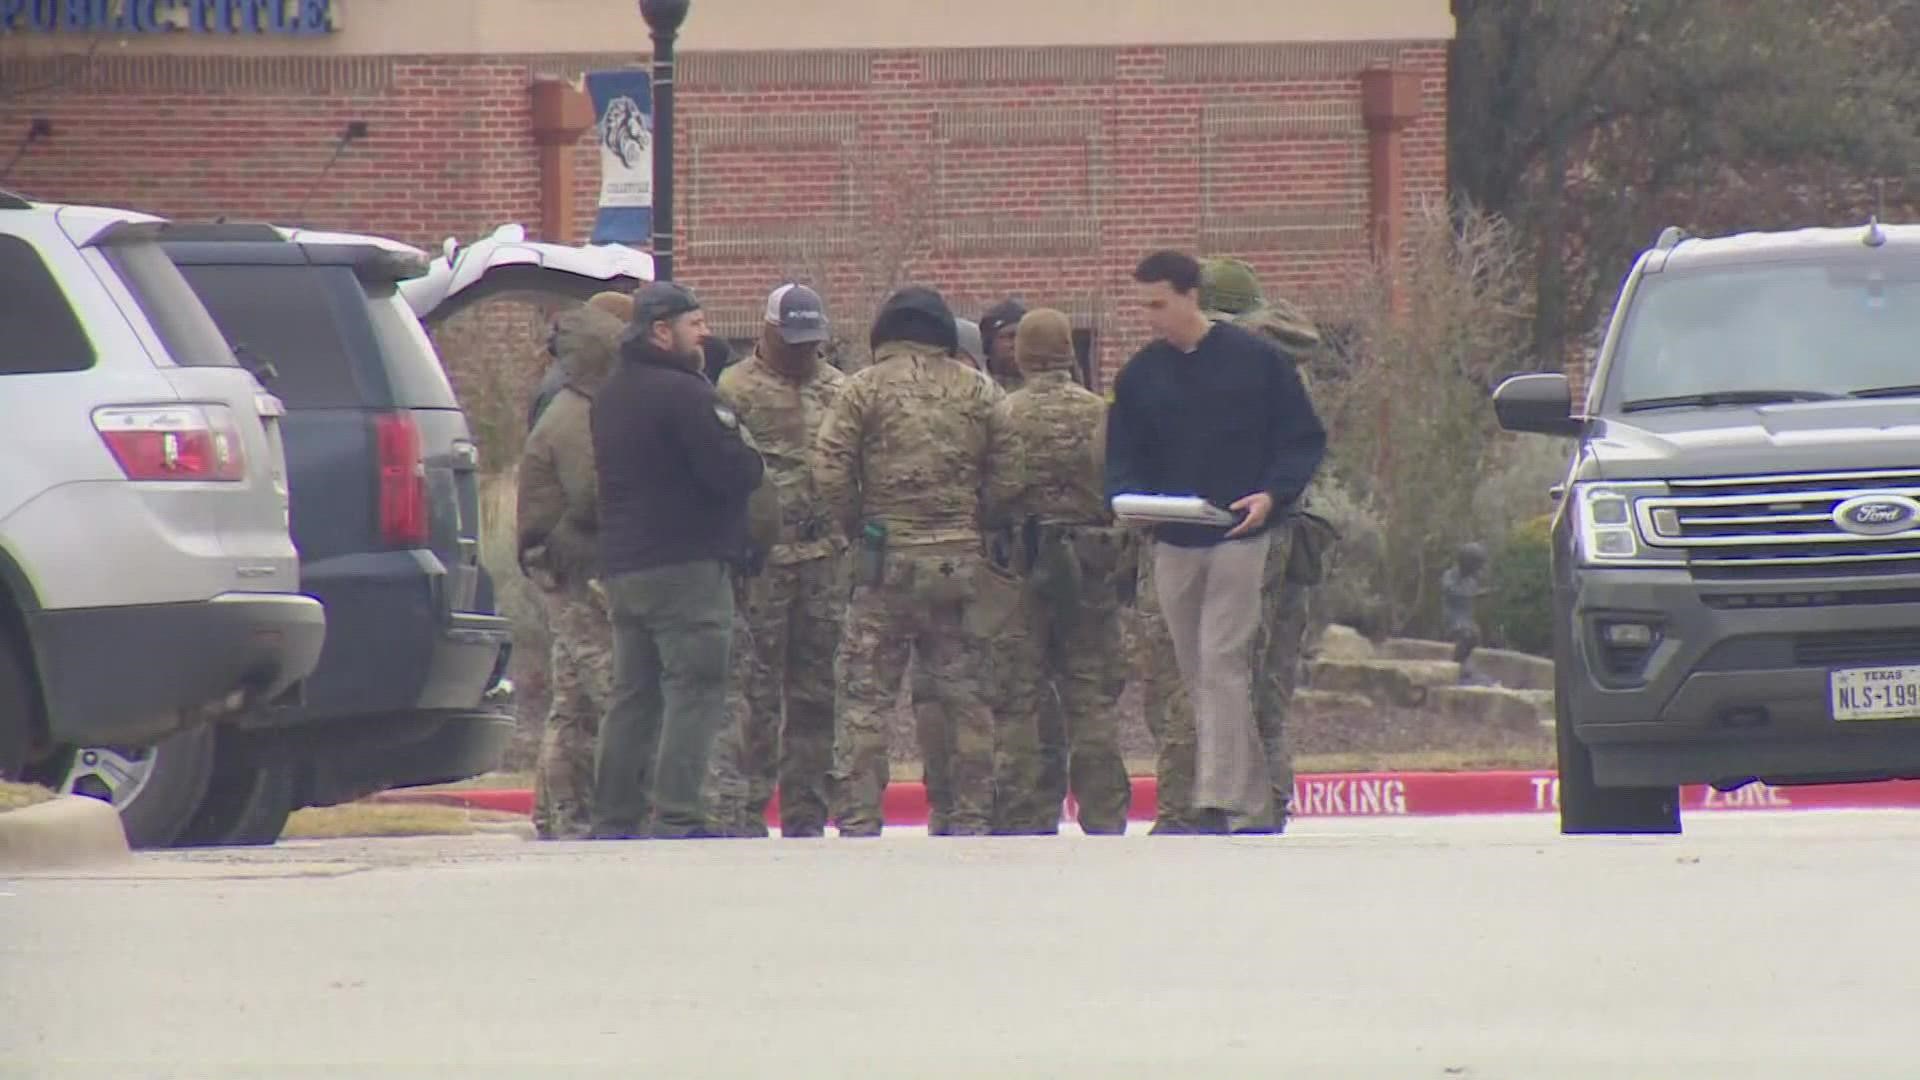 Van Duyne represents the area of North Texas where the hostage situation is ongoing.